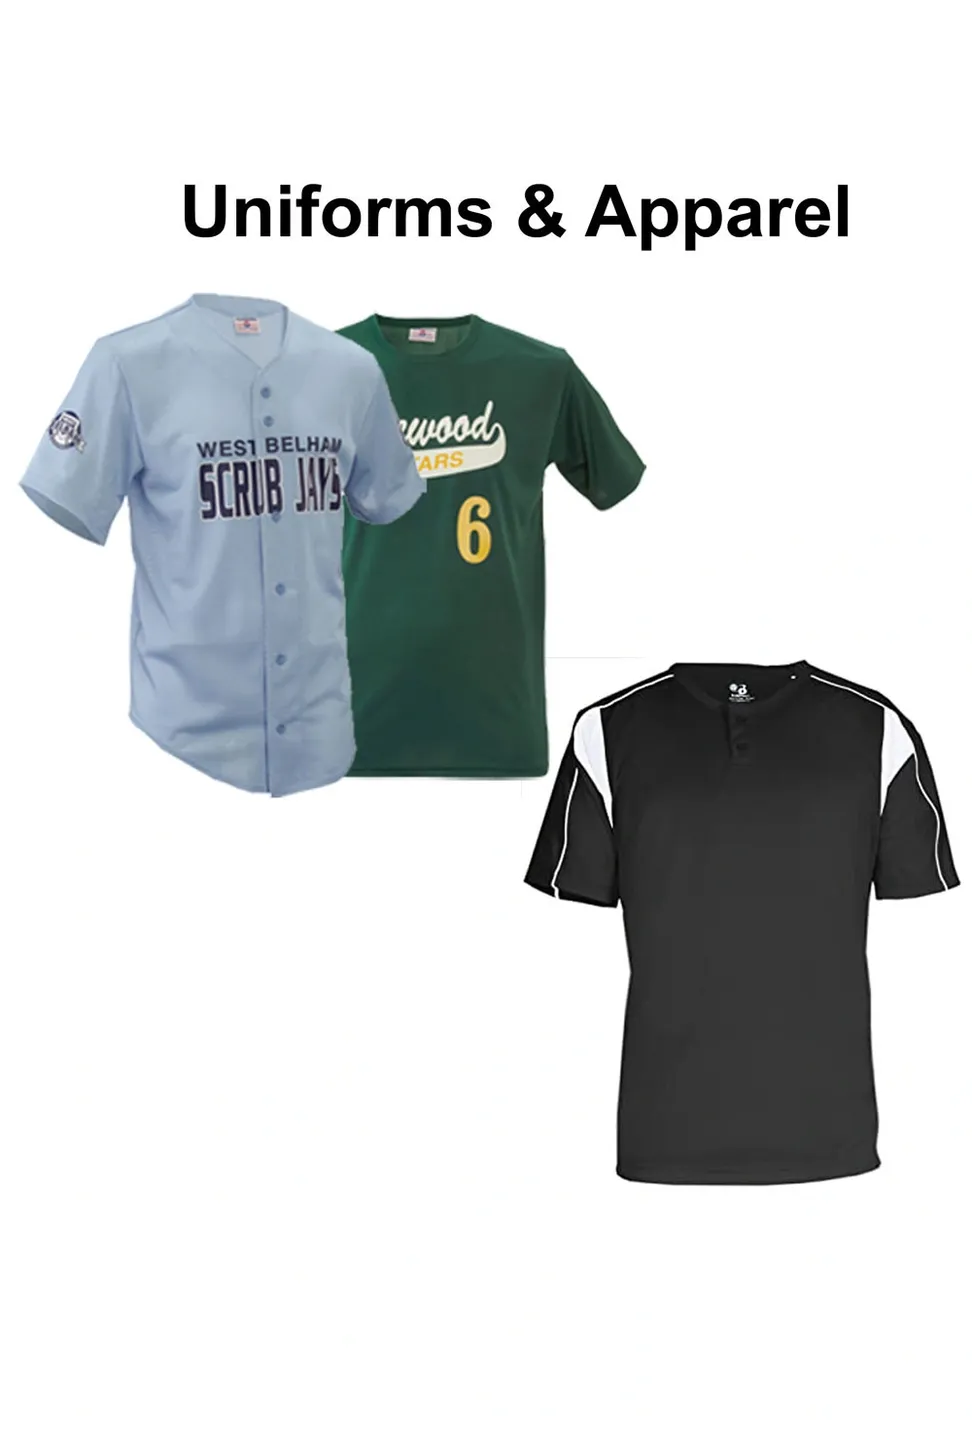 Uniforms and Apparel